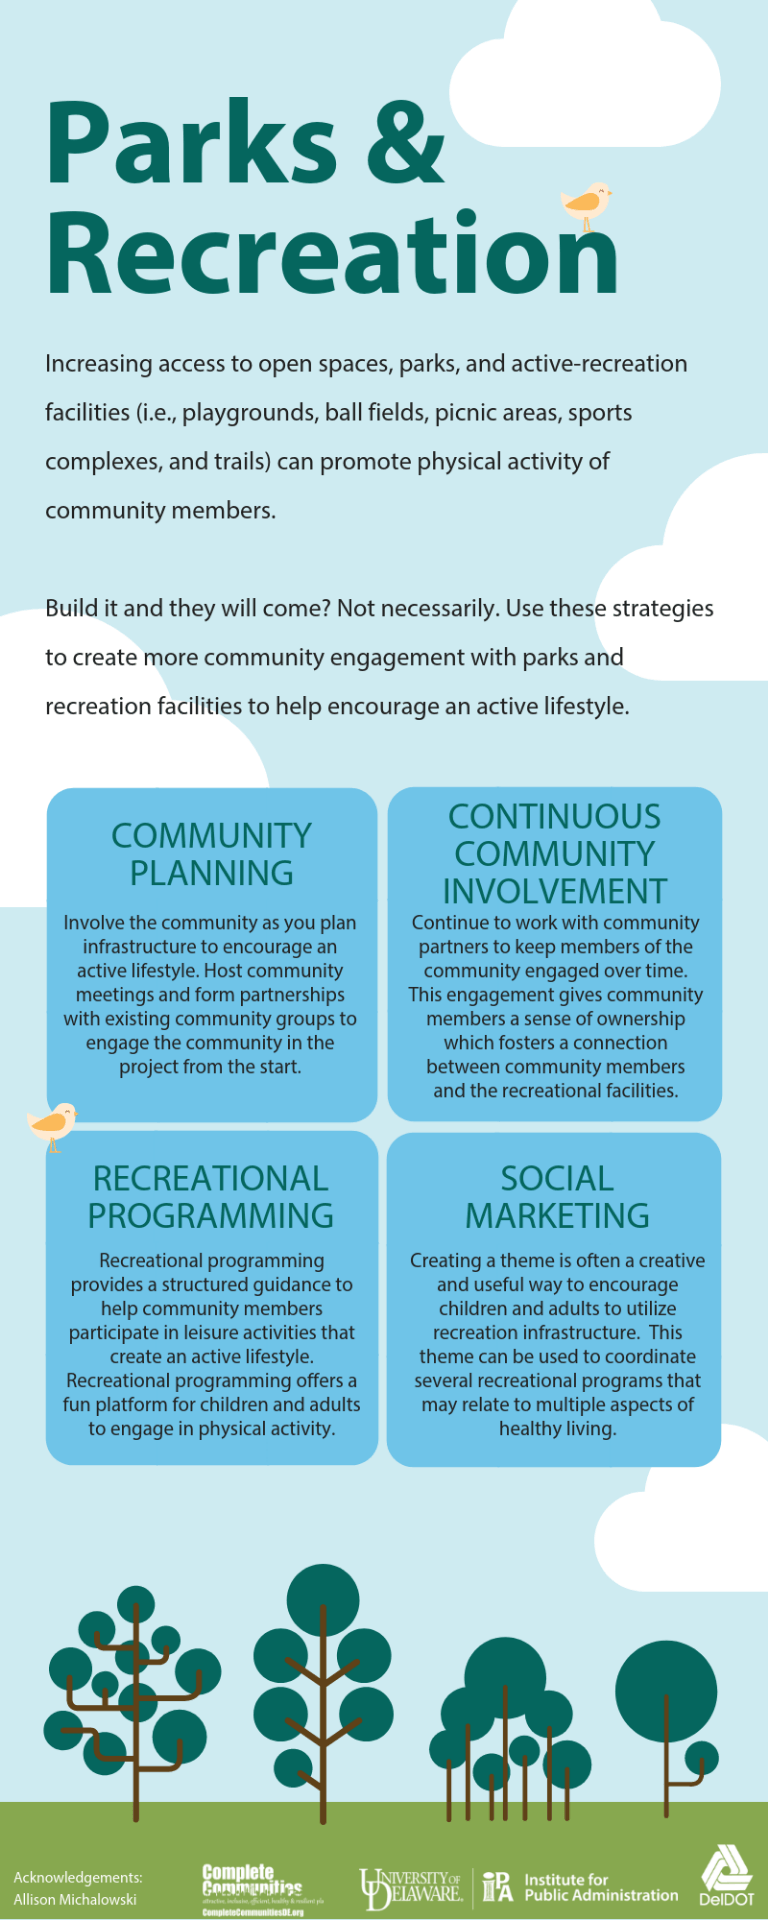 Infographic describing how community planning, continuous community involvement, recreational programming, and social marketing increase use of parks and recreational facilities.